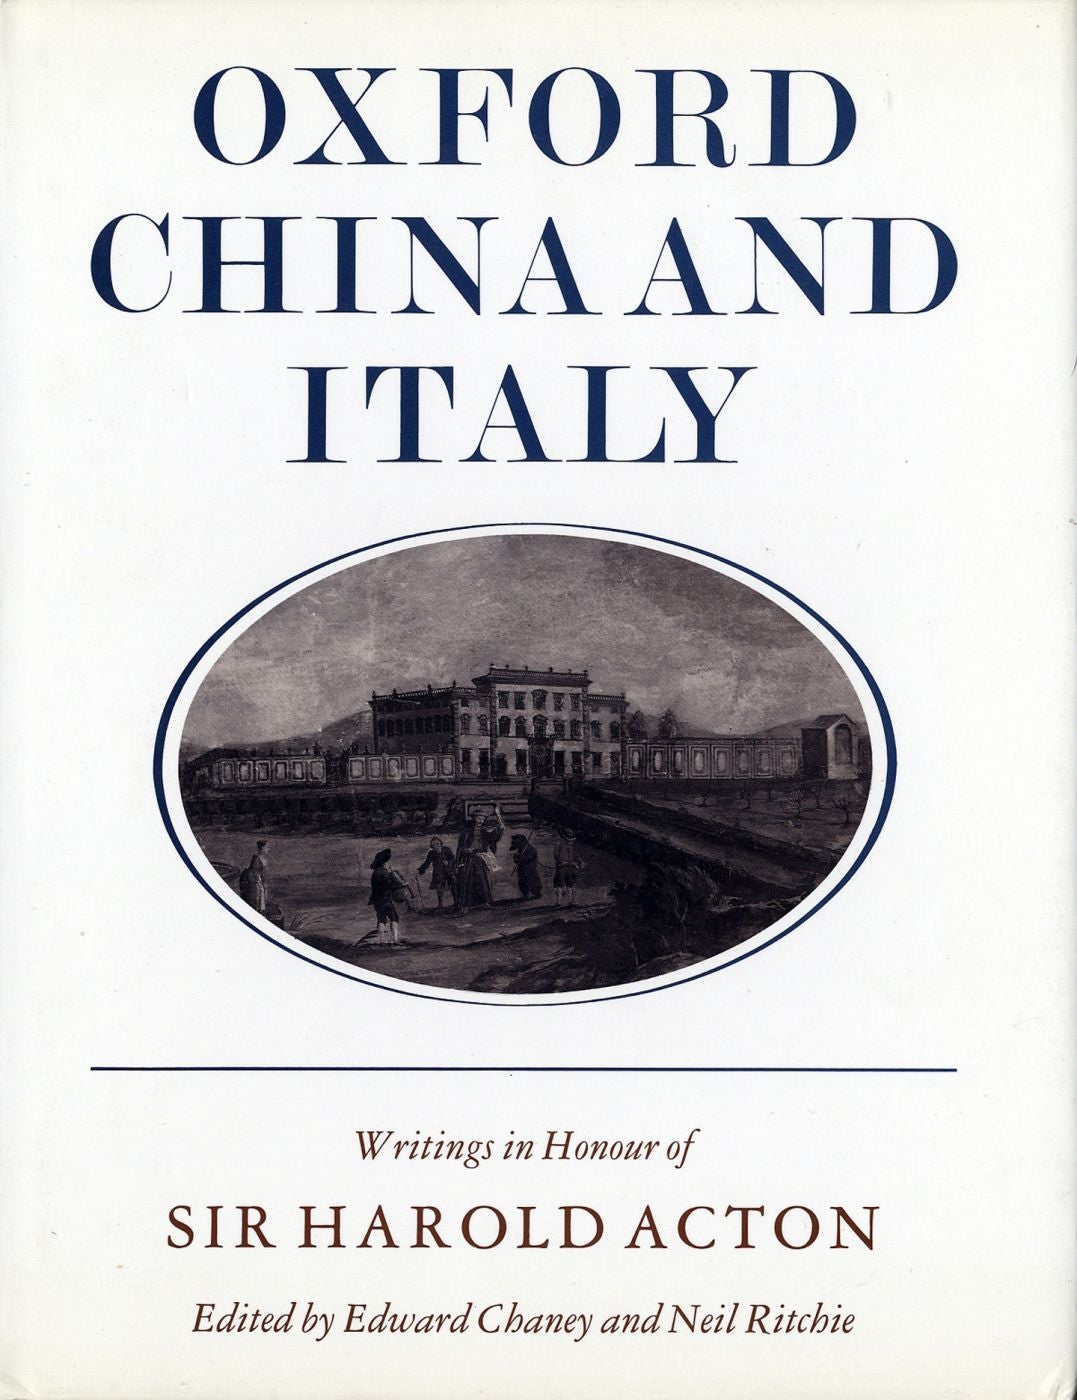 Oxford, China and Italy: Writings in Honour of Sir Harold Acton on his Eightieth Birthday [SIGNED ASSOCIATION COPY]